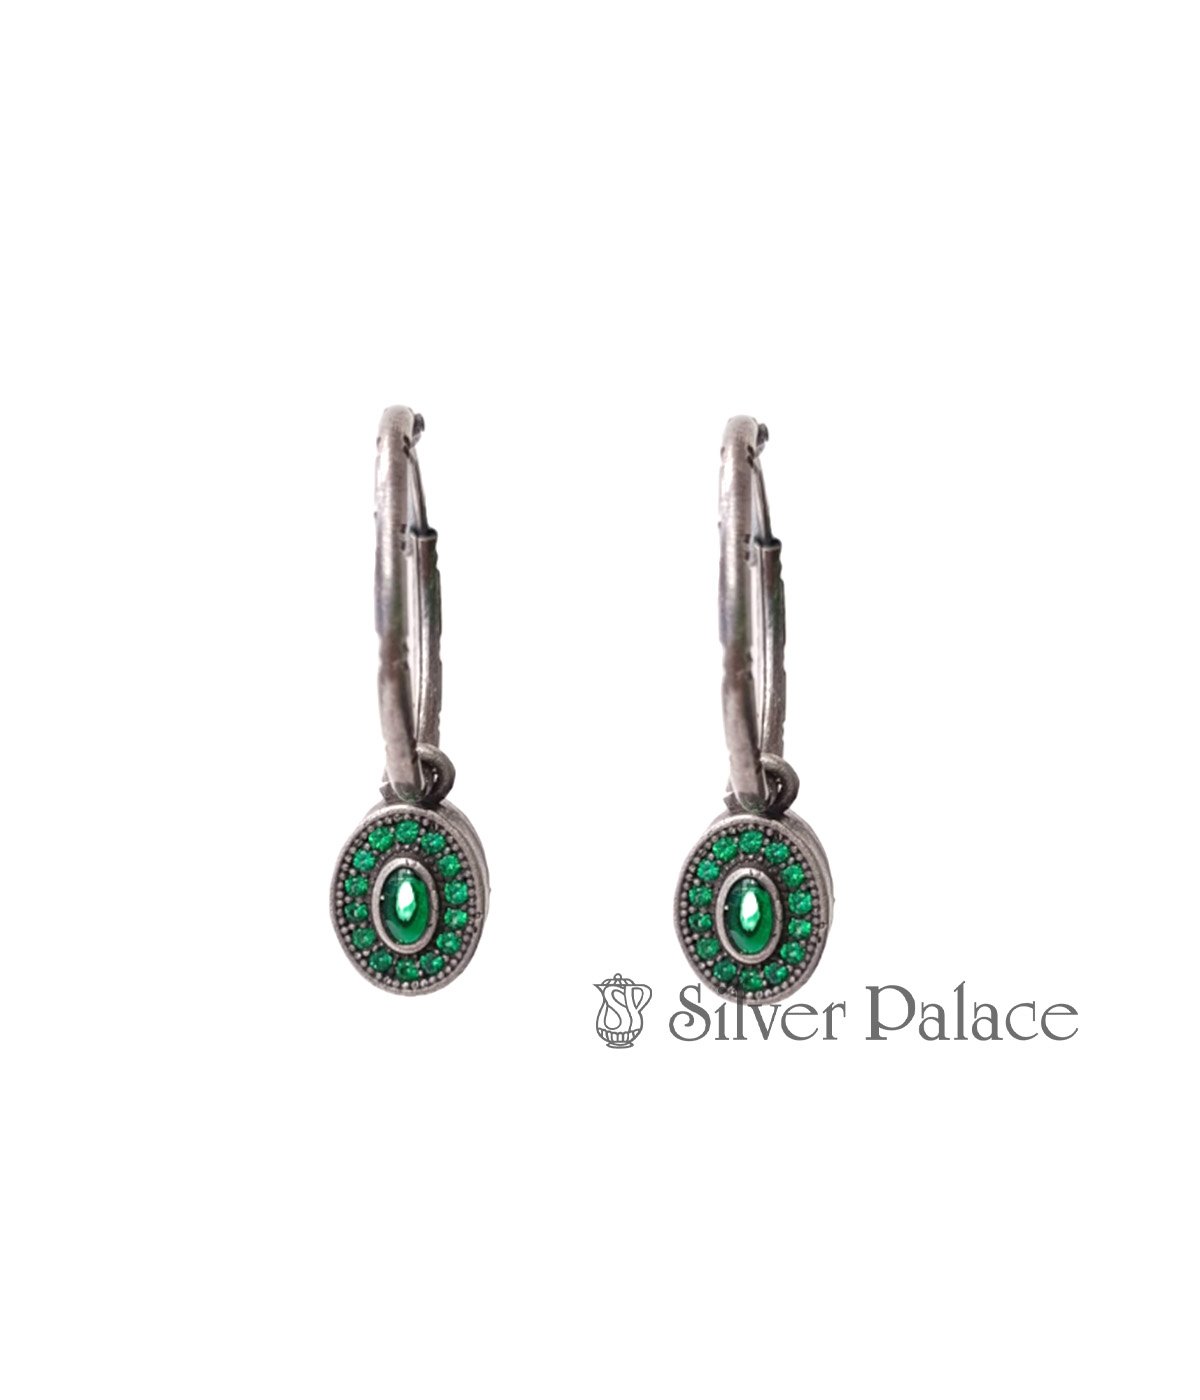 92.5 SILVER GREEN HOOPS EARRINGS WITH GREEN REMOVABLE PENDANT